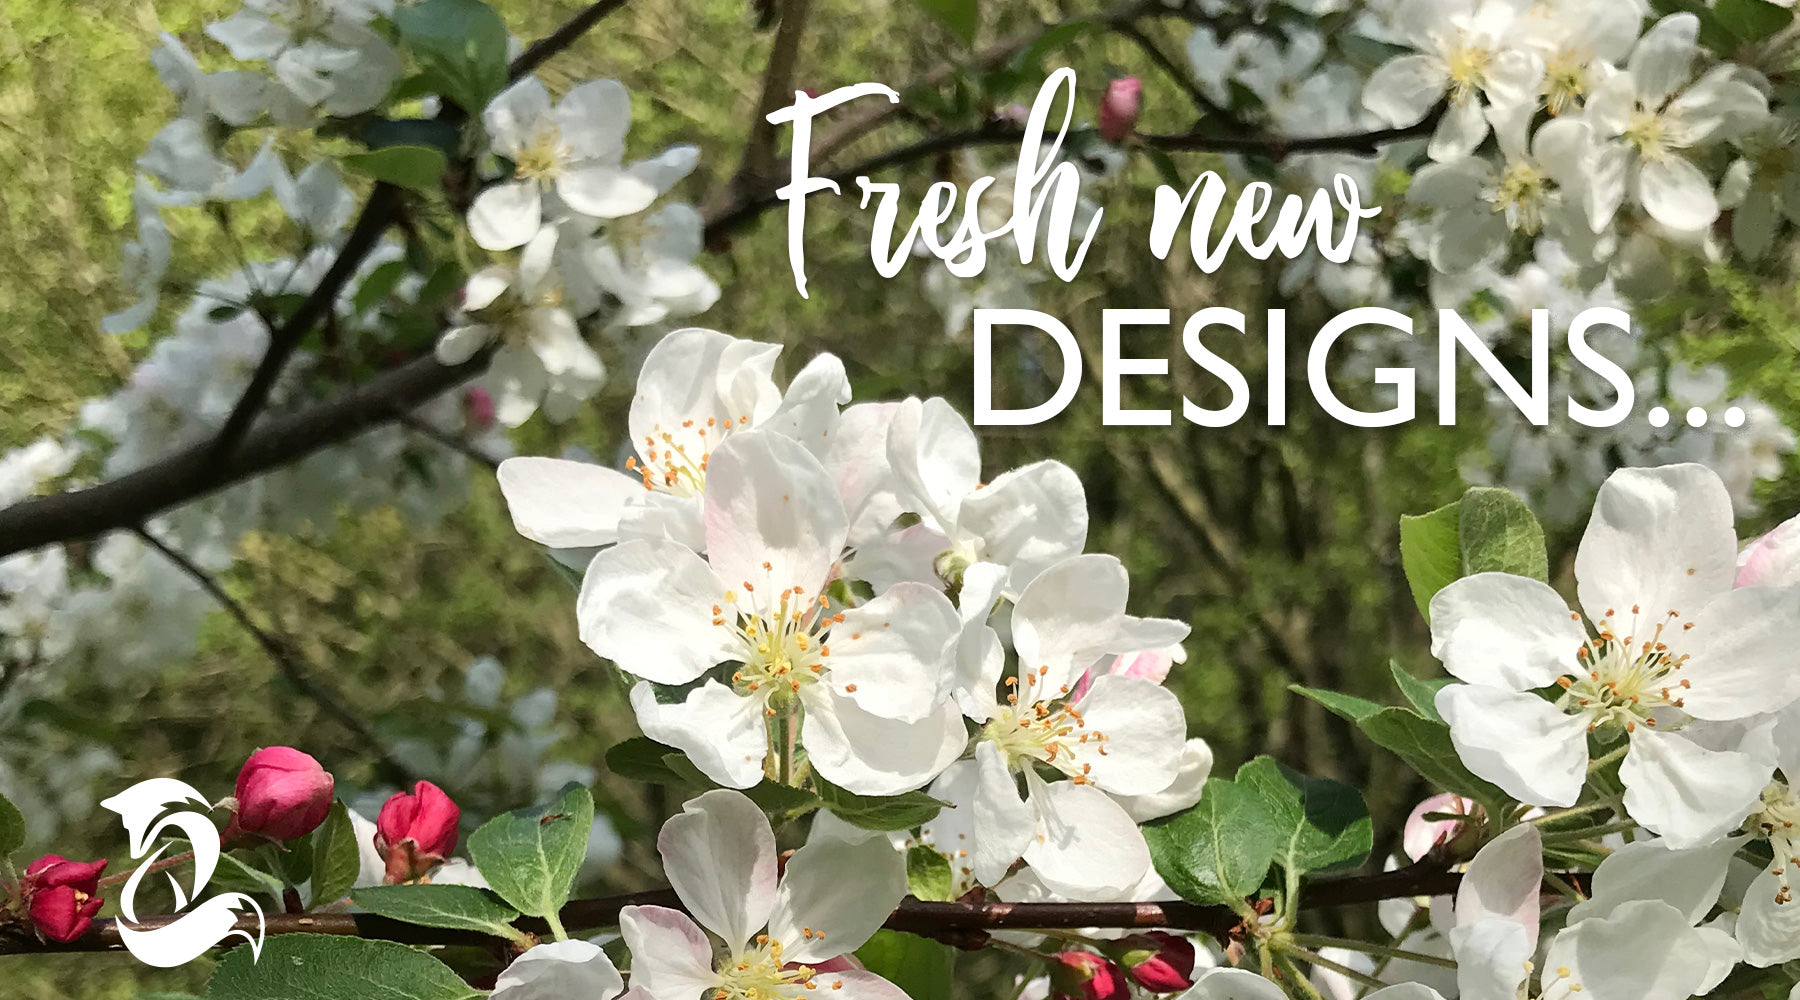 Fox and Boo; Designer Homeware and Greetings; Slider image of beautiful hawthorn blossom with overlay text 'Fresh New Designs'